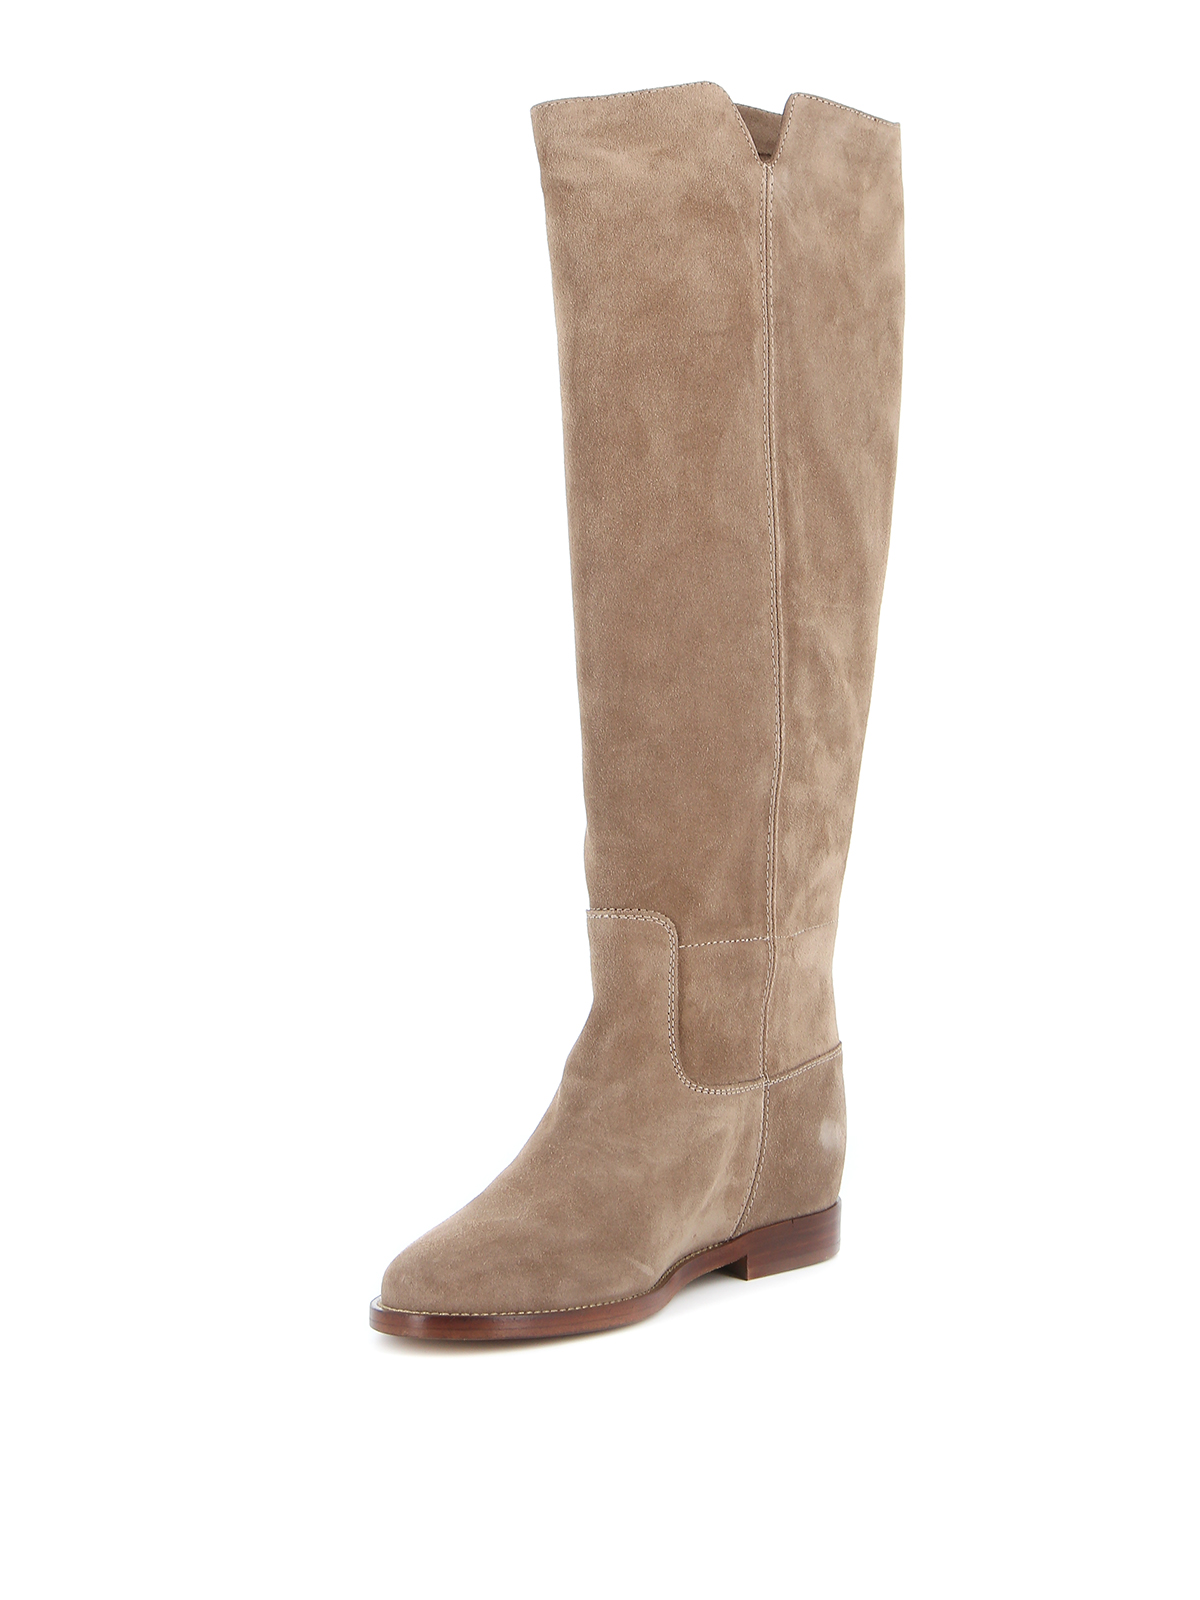 zadel fles Gehoorzaamheid Boots Via Roma 15 - Suede boots with star patch - 3256VELOURSCOCCO